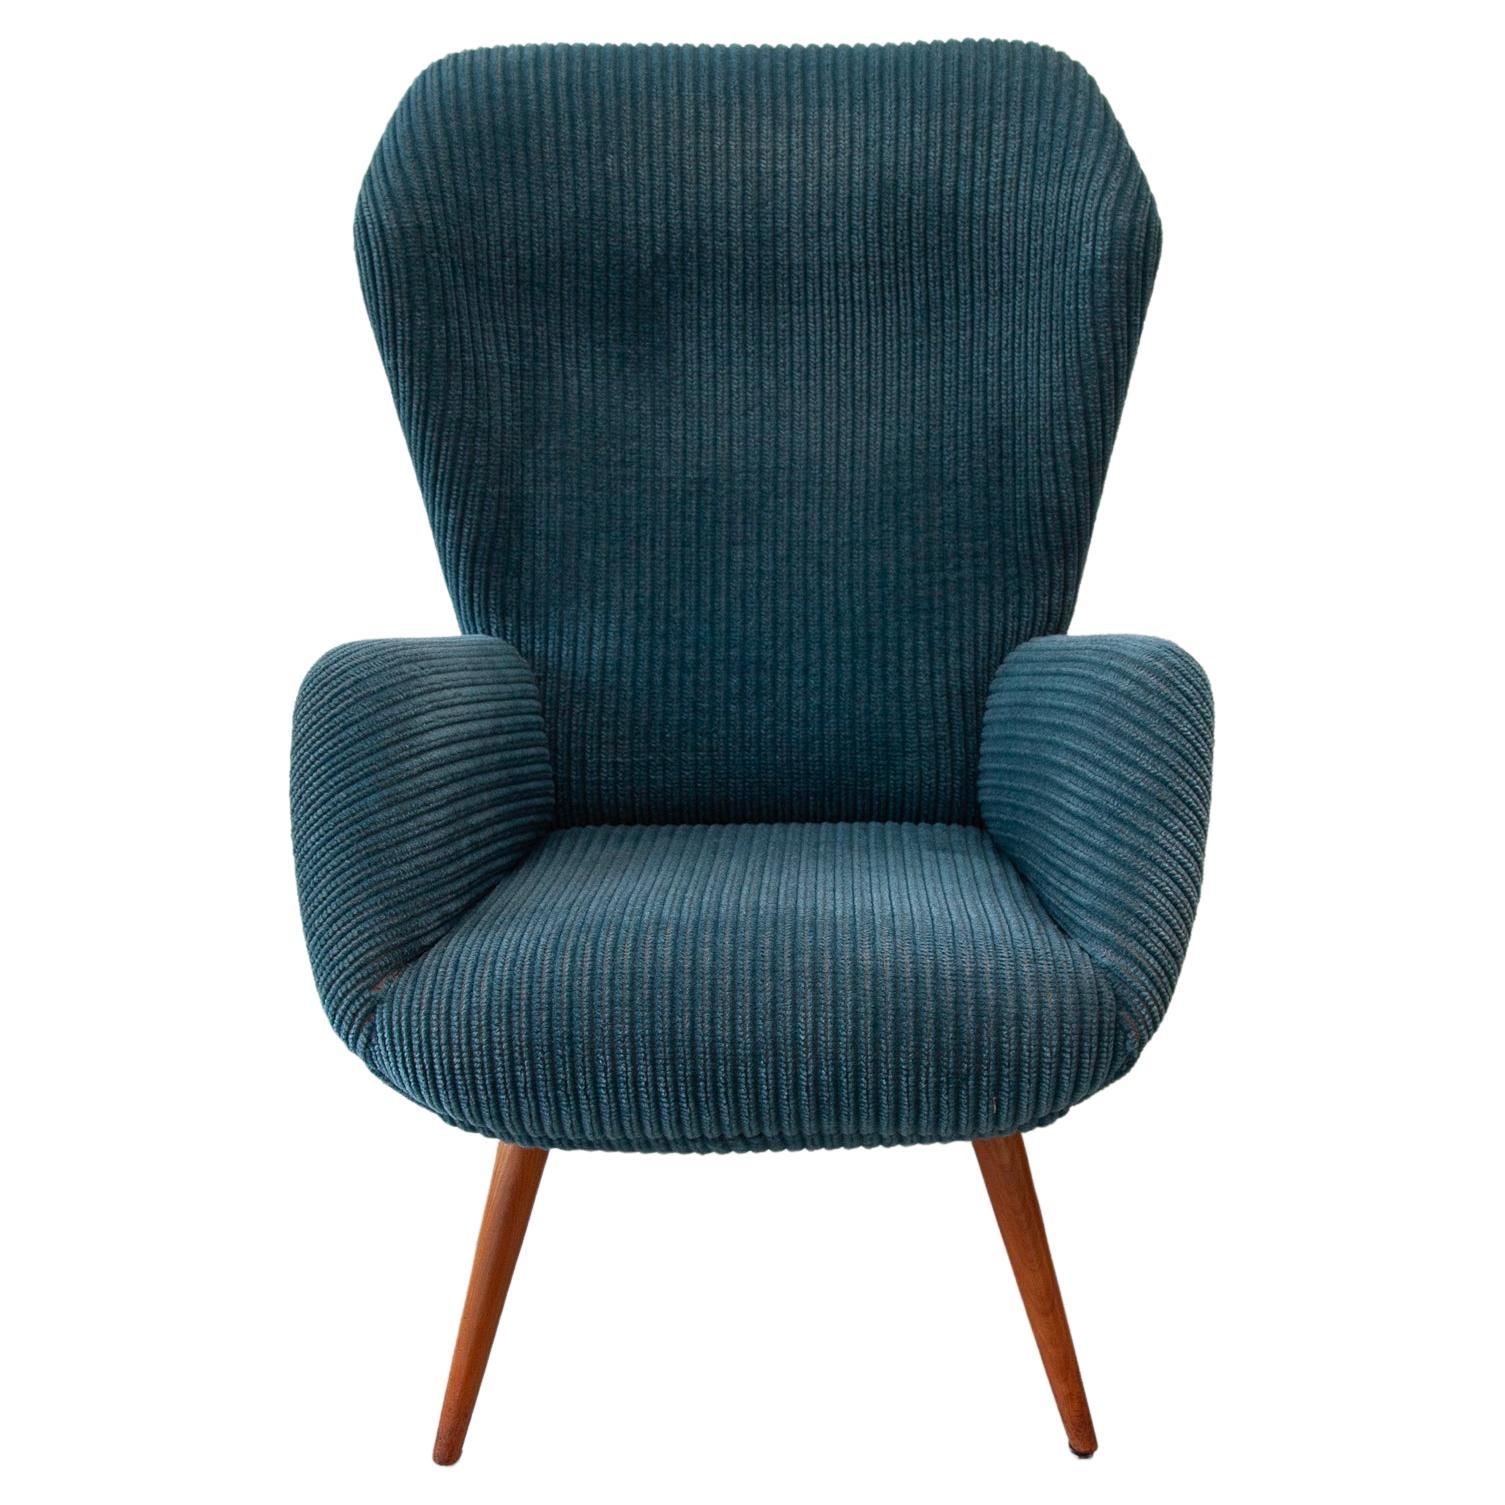 A wingback lounge chair designed by German designer Ernst Max Jahn for Deutsche Werkstätten Hellerau. The frame has a beautiful, design, stands on four elegant tapering teak legs and has a soft blue upholstery. Very comfortable to sit in.
